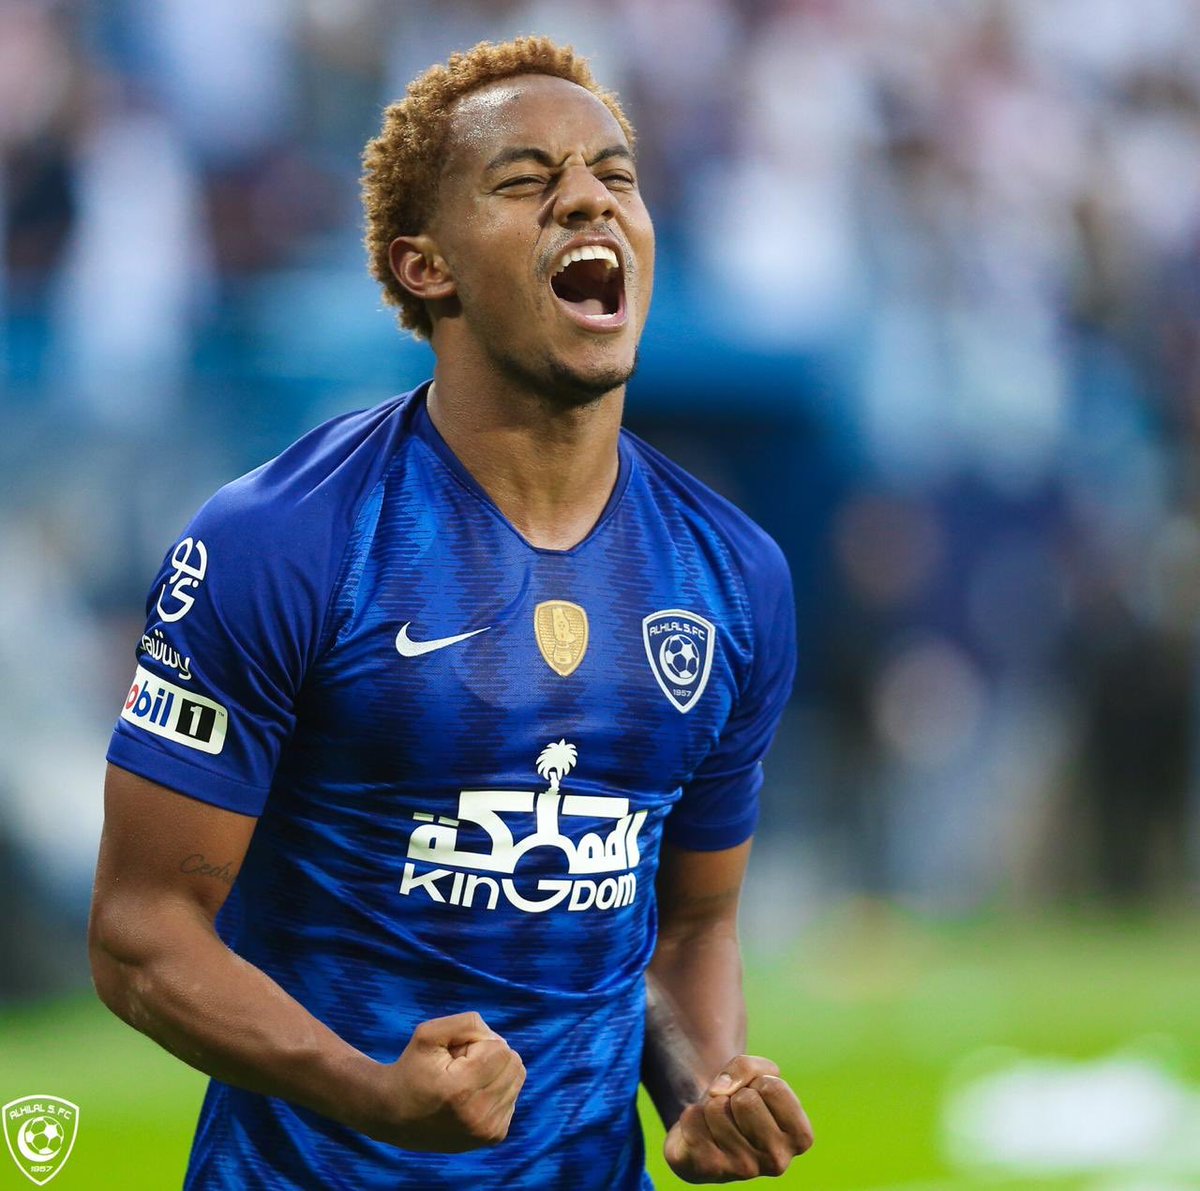 The 31-year old son of father (?) and mother(?) André Carrillo in 2023 photo. André Carrillo earned a  million dollar salary - leaving the net worth at  million in 2023